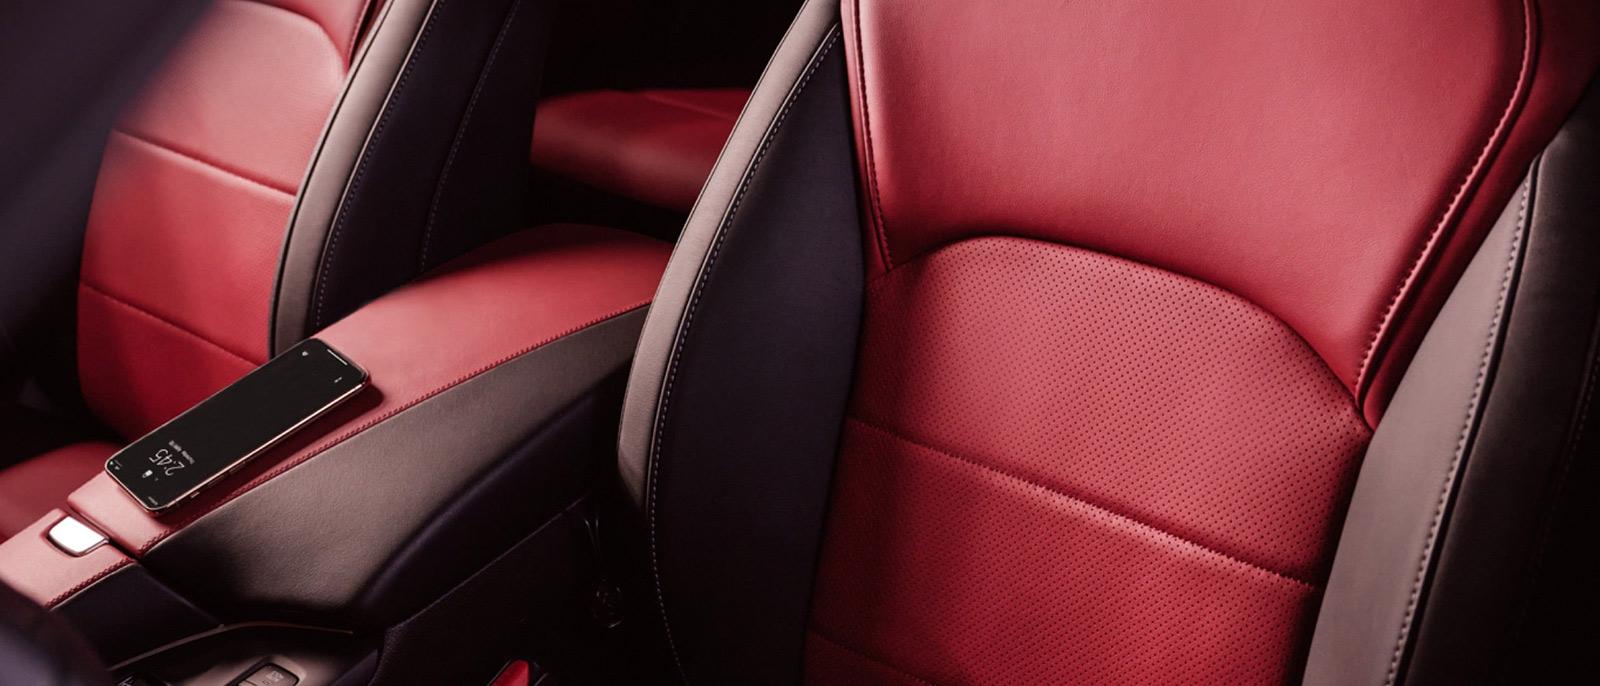 Interior detail of an INFINITI QX55 front seats in red and burgundy leather.